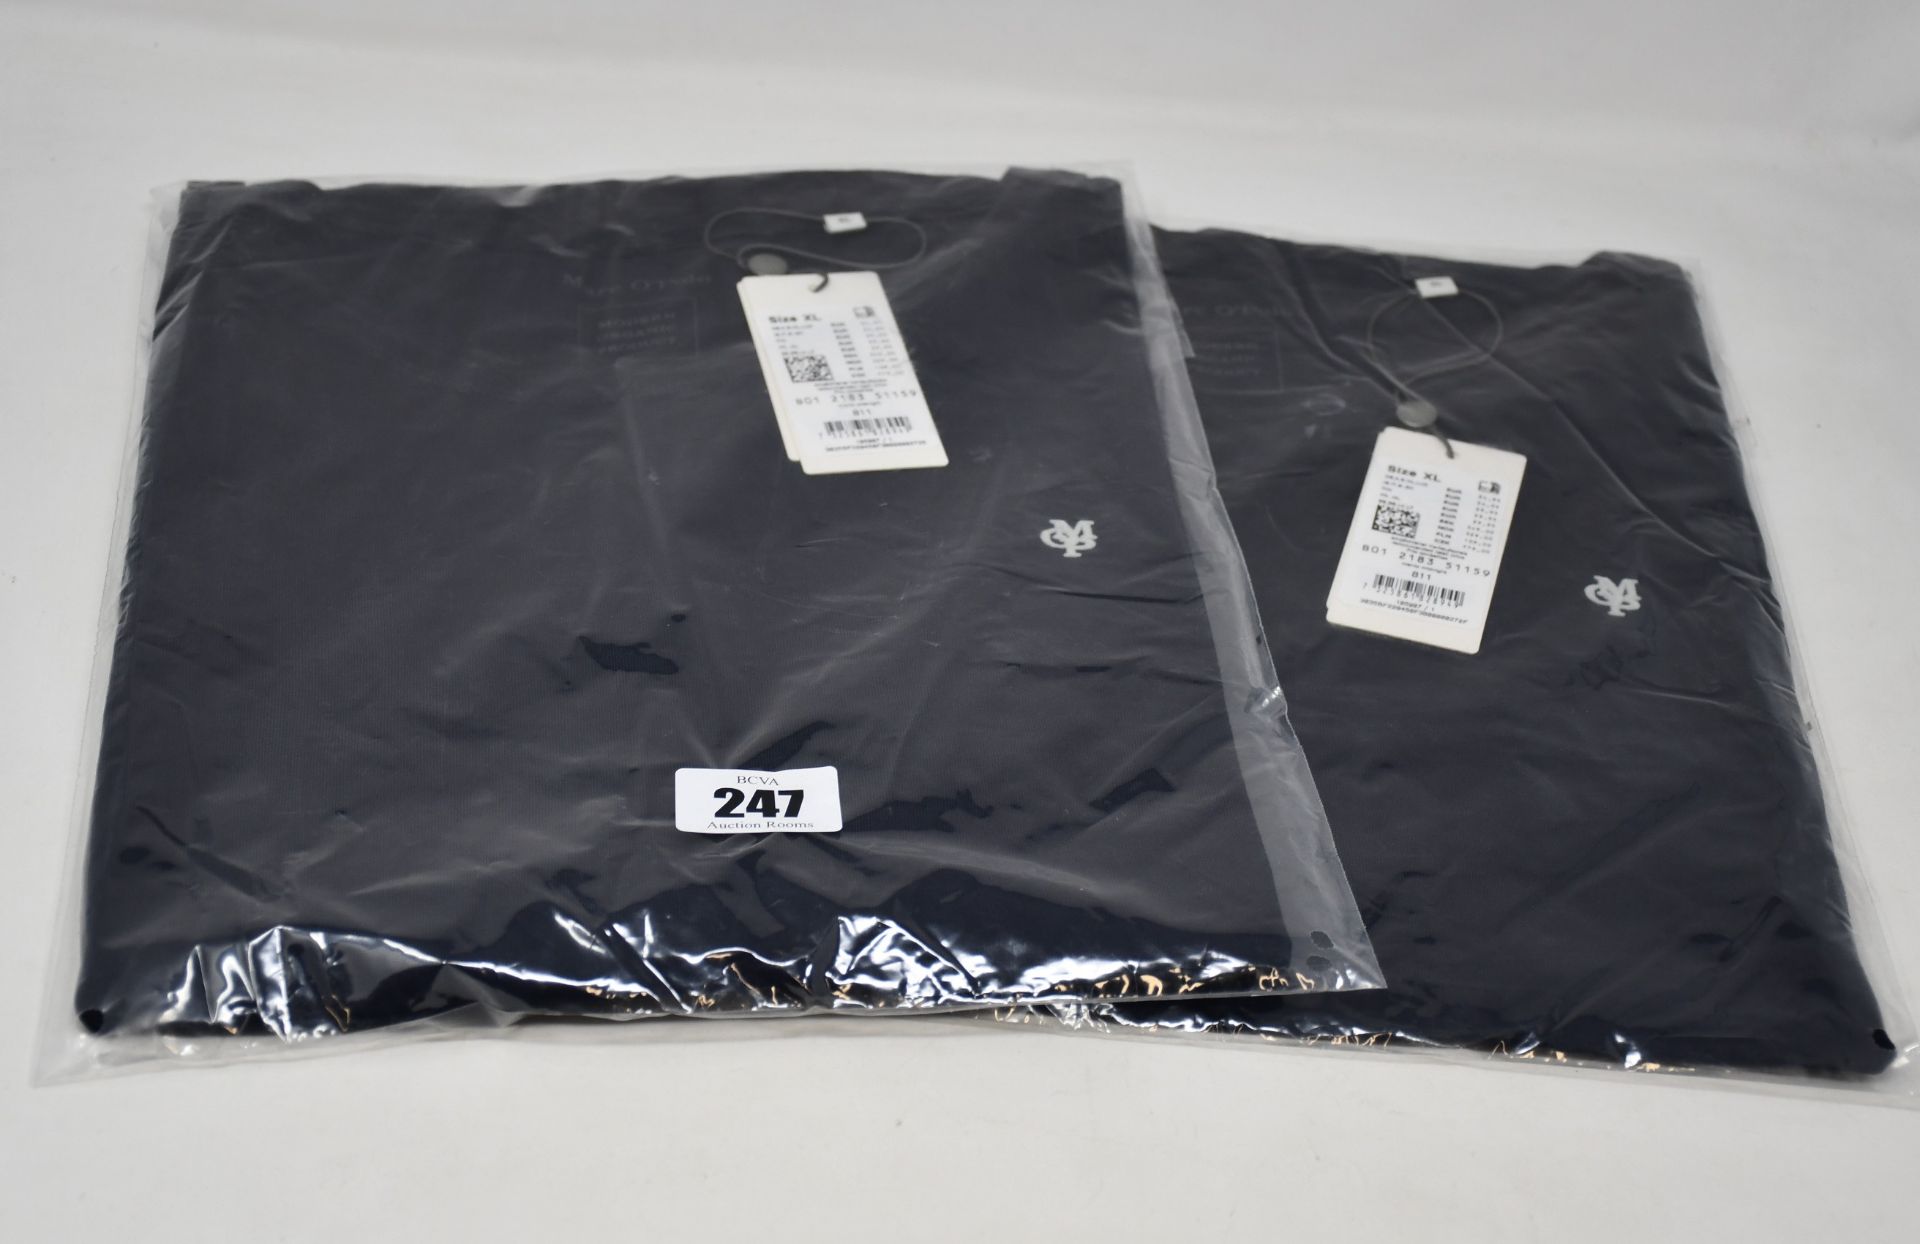 Five as new Marc O'Polo T-shirts in manic midnight (2 x M, 2 x XL - RRP €30 each).